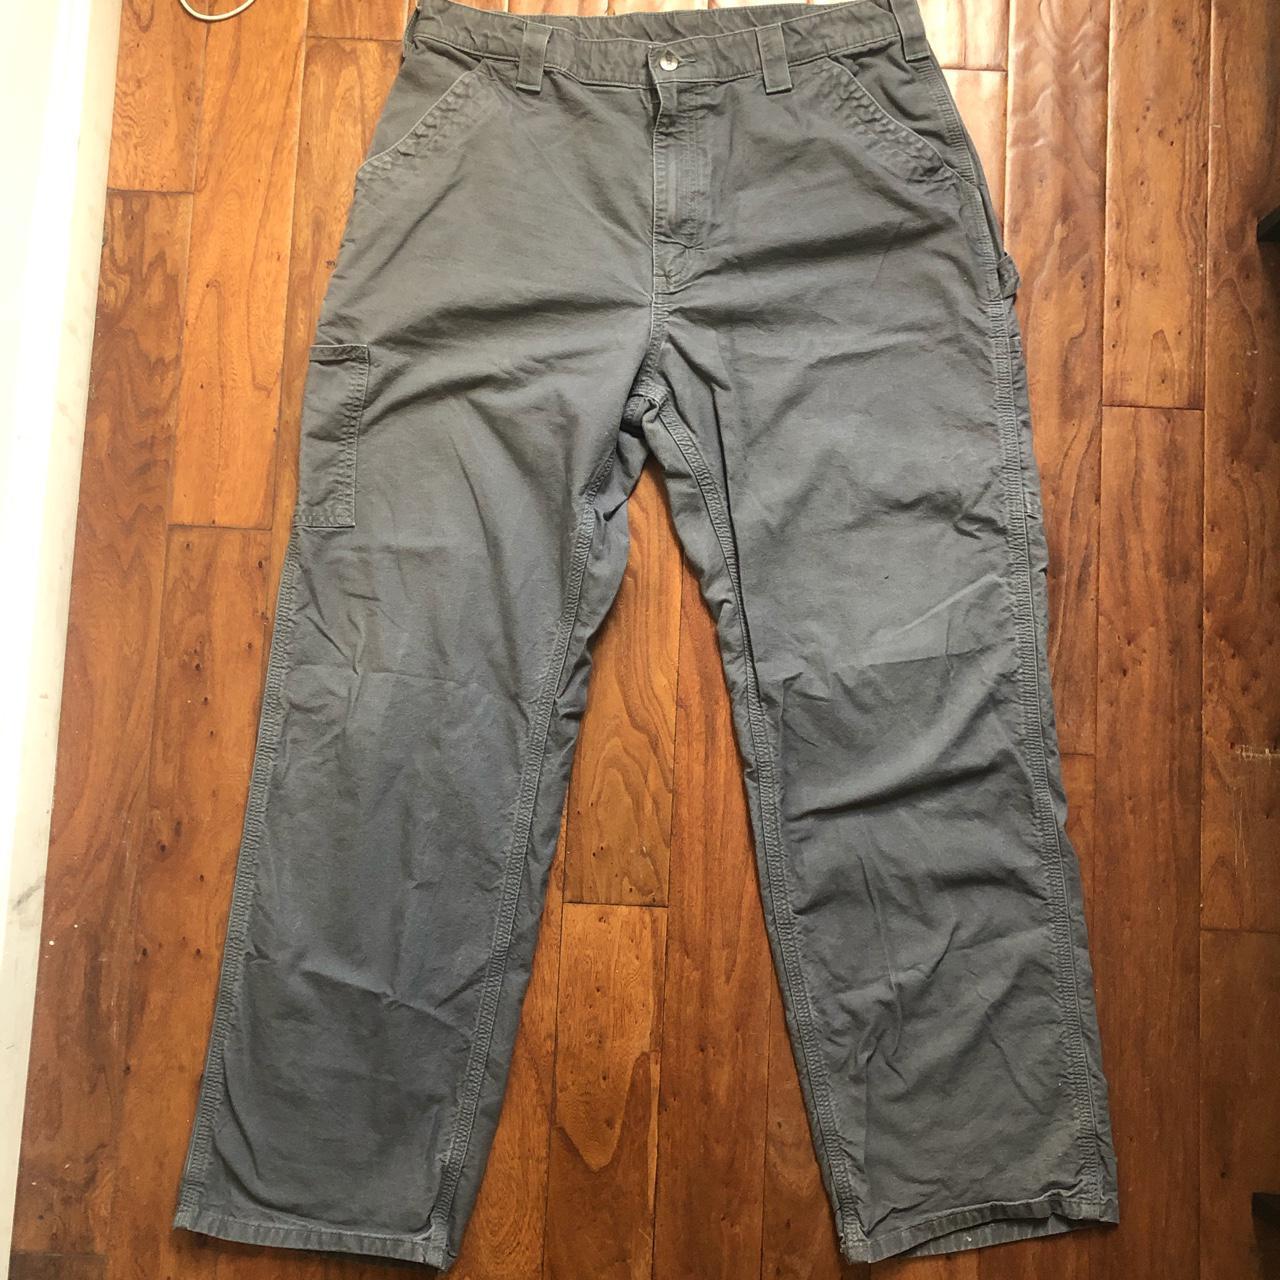 Carhartt Men's Grey and Silver Trousers | Depop